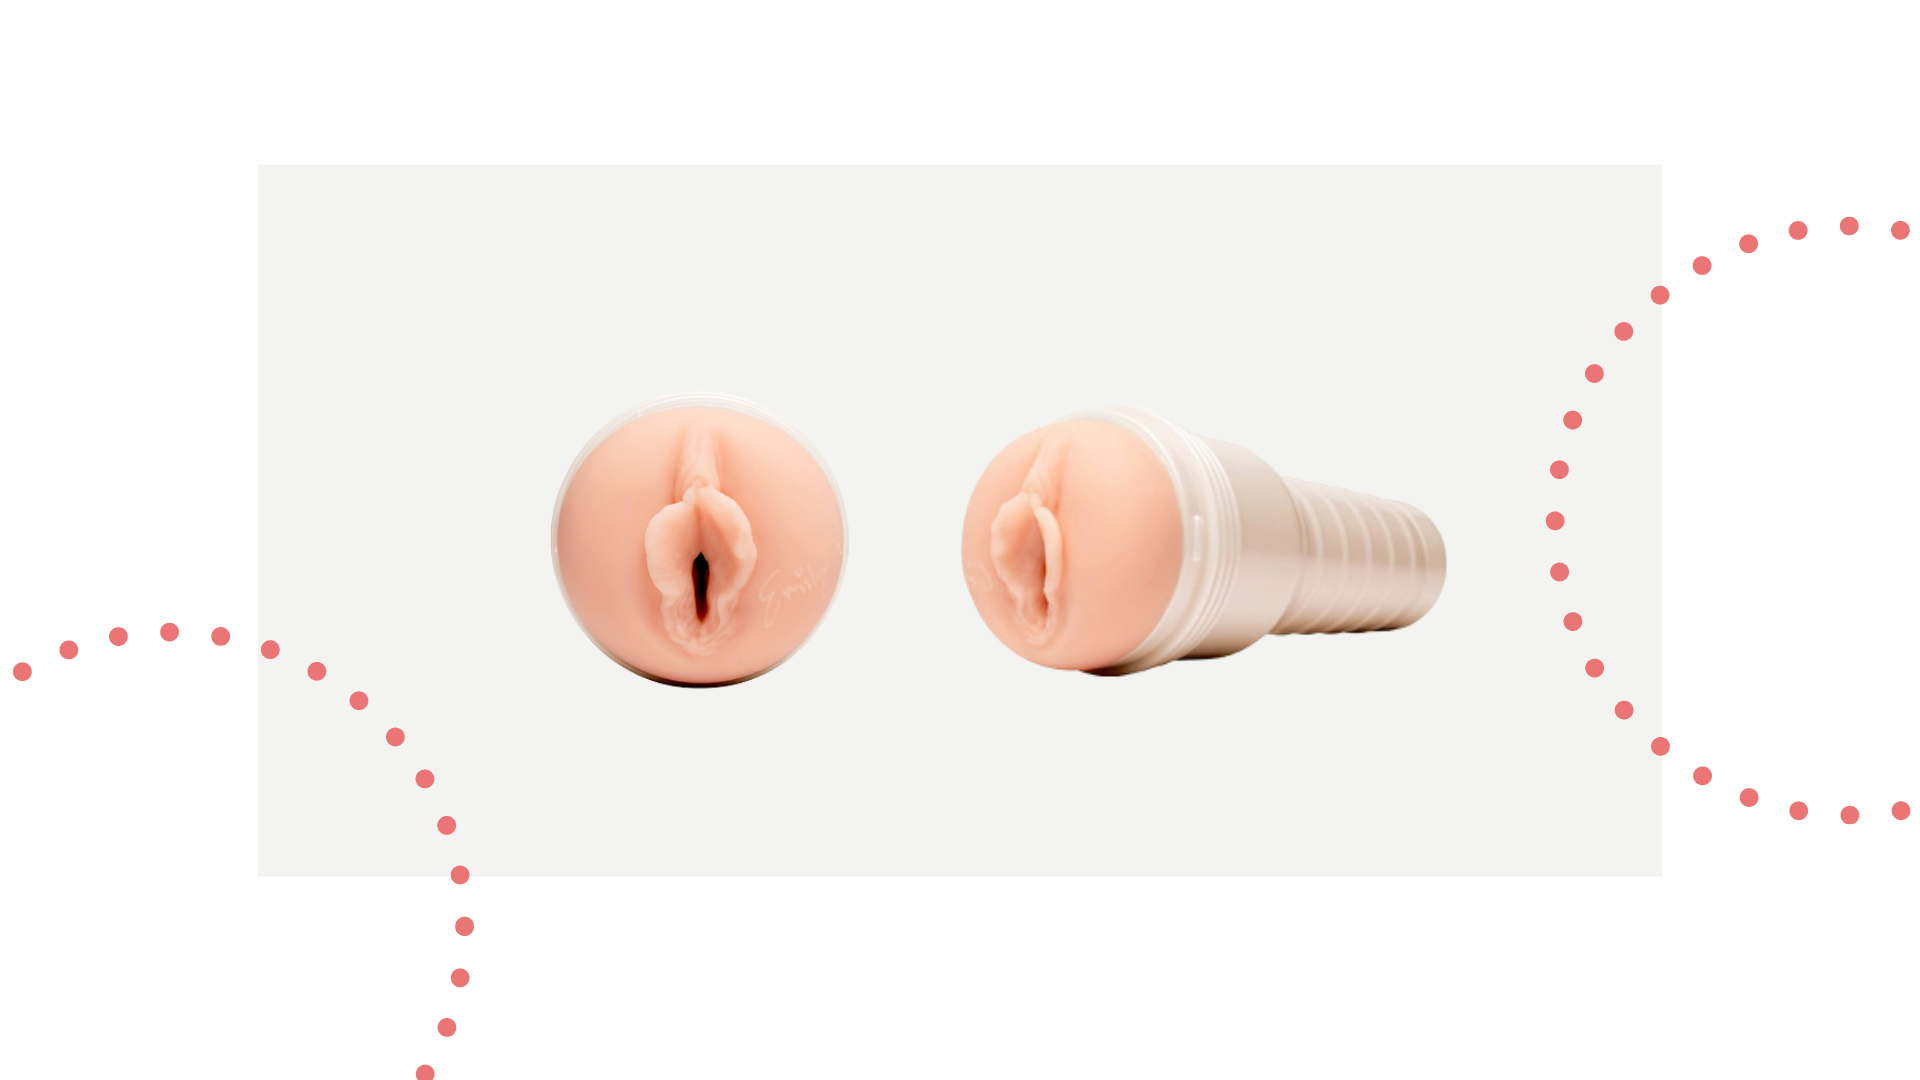 What Does a Fleshlight Feel Like? And how good are they? Big survey!